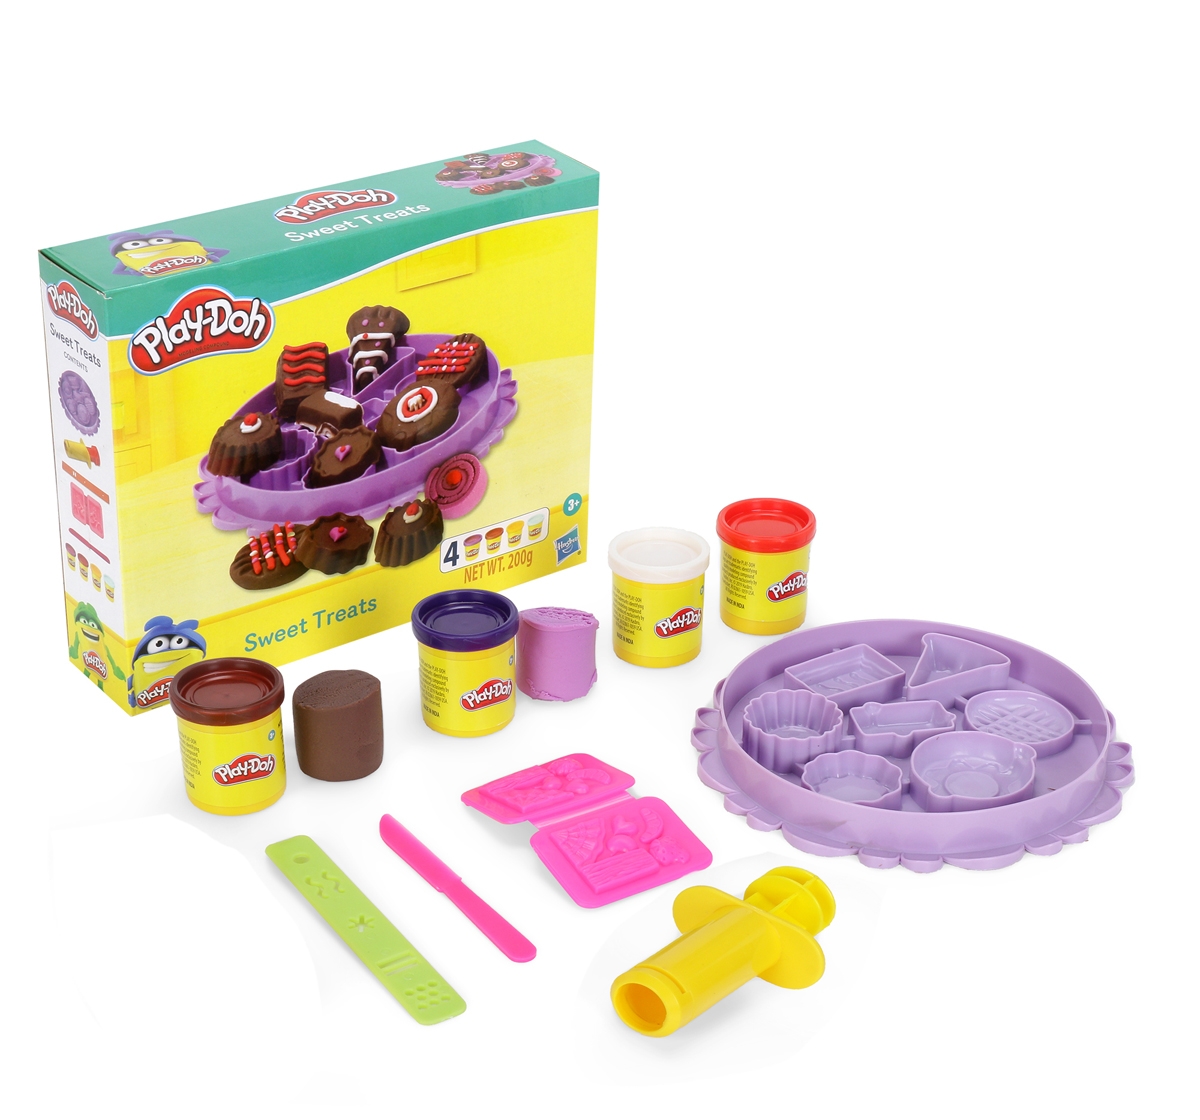 Play-Doh | Play Doh Sweet Treats Playset for Kids 3Y+, Multicolour